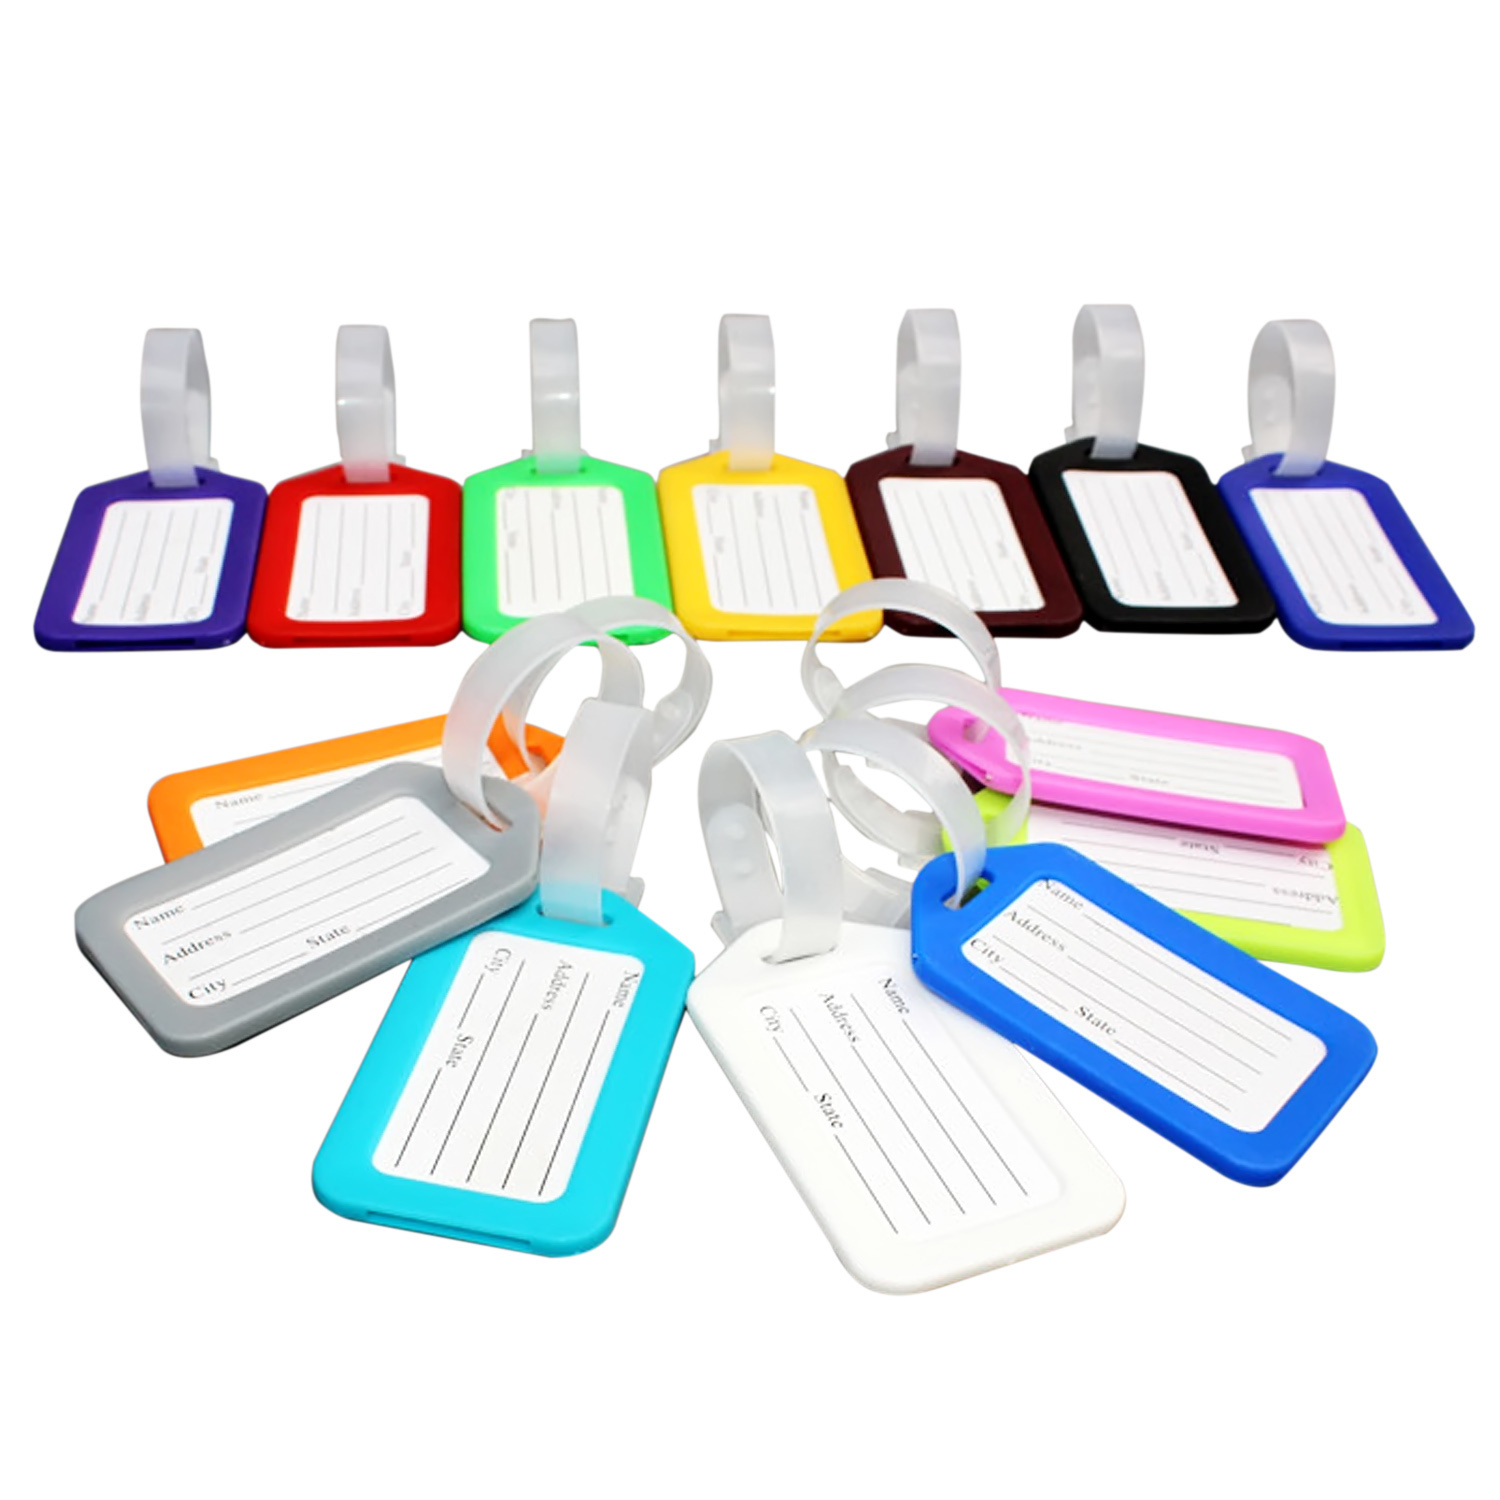 10 PCS Travel Accessories Luggage Hang Tag Identifier with Name Card Random Color (Intl)